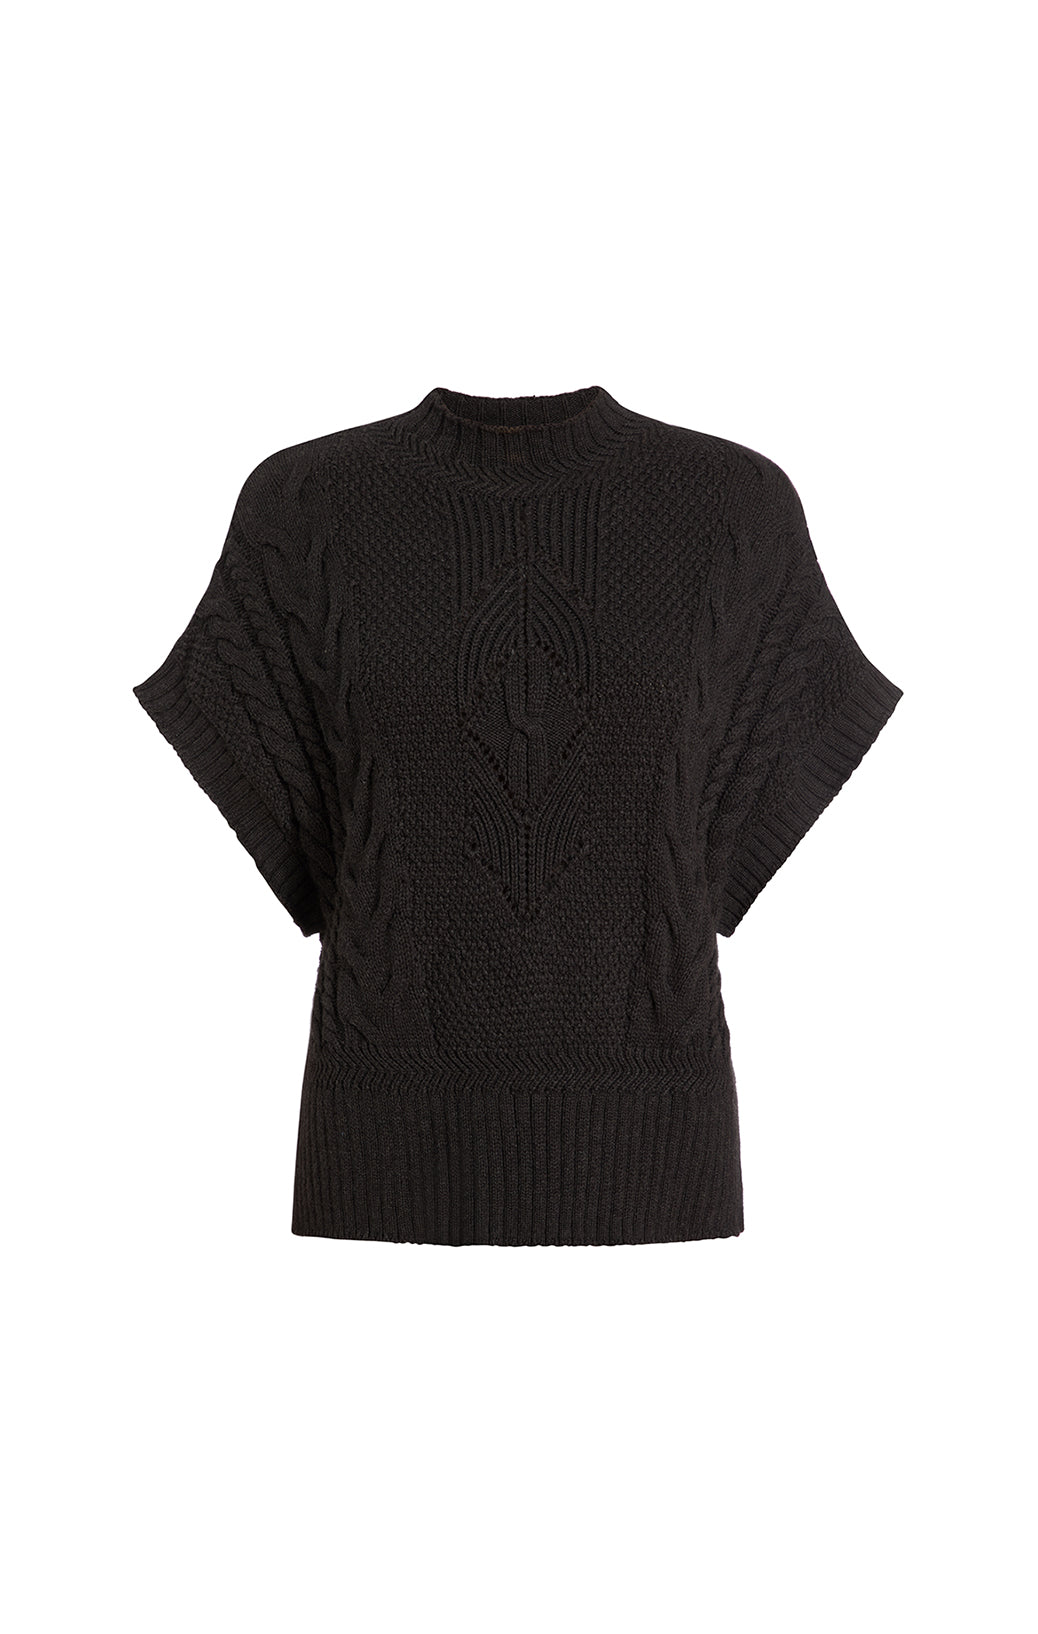 Valkyrie - Fringed Navy Cardigan Sweater - Product Image